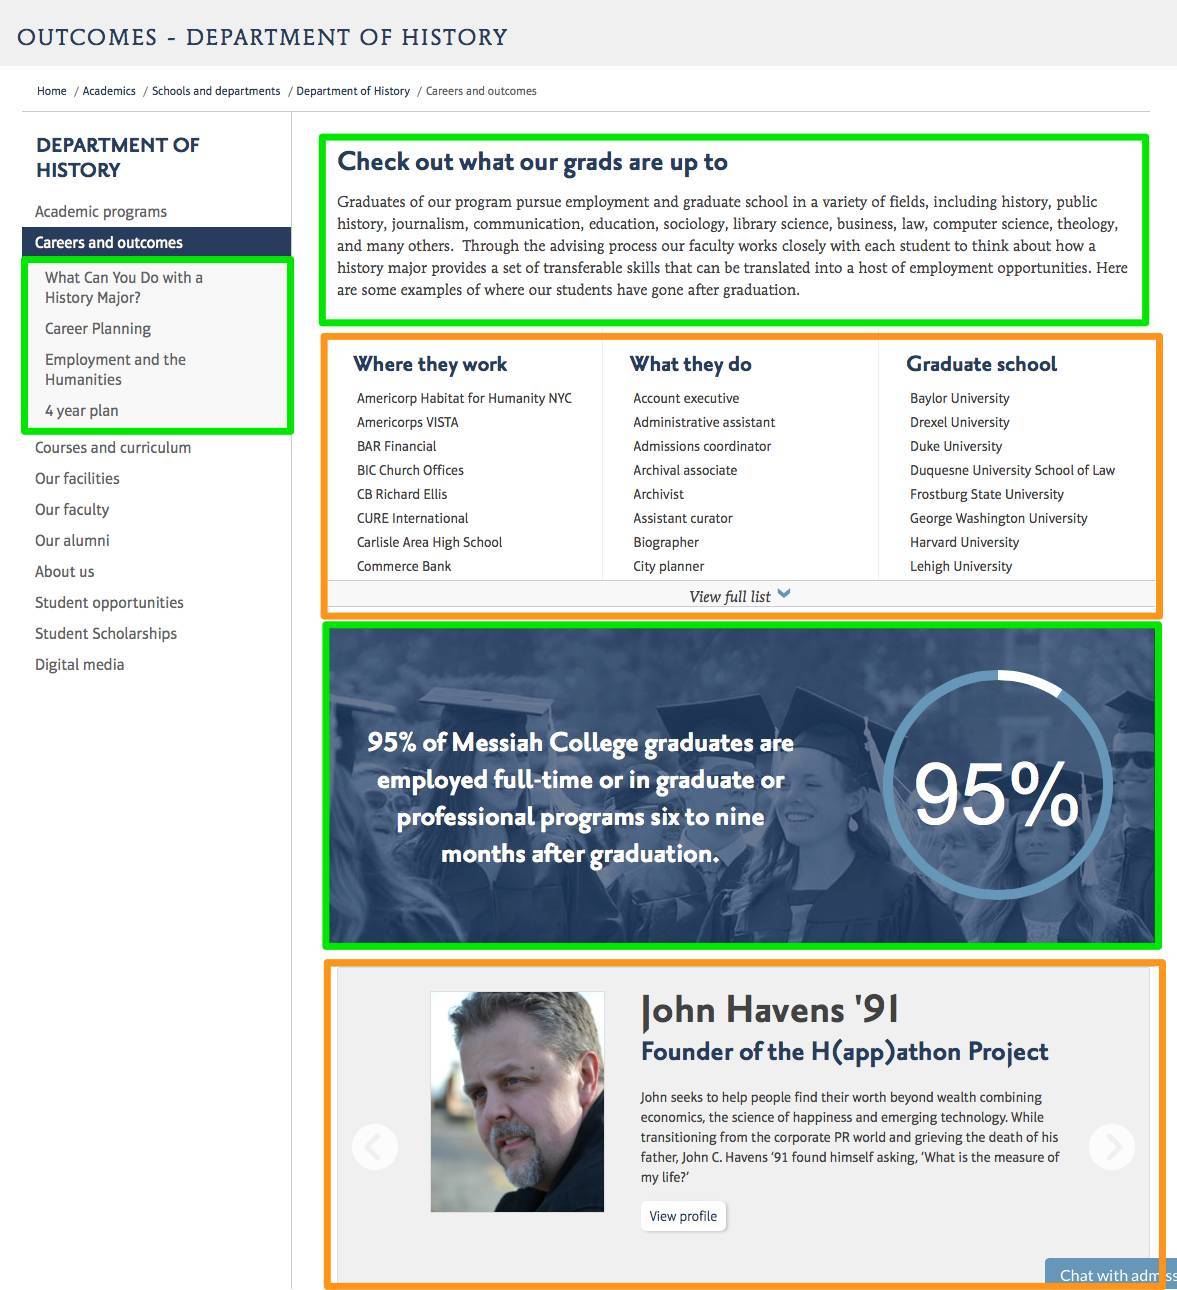 Careers and outcomes page